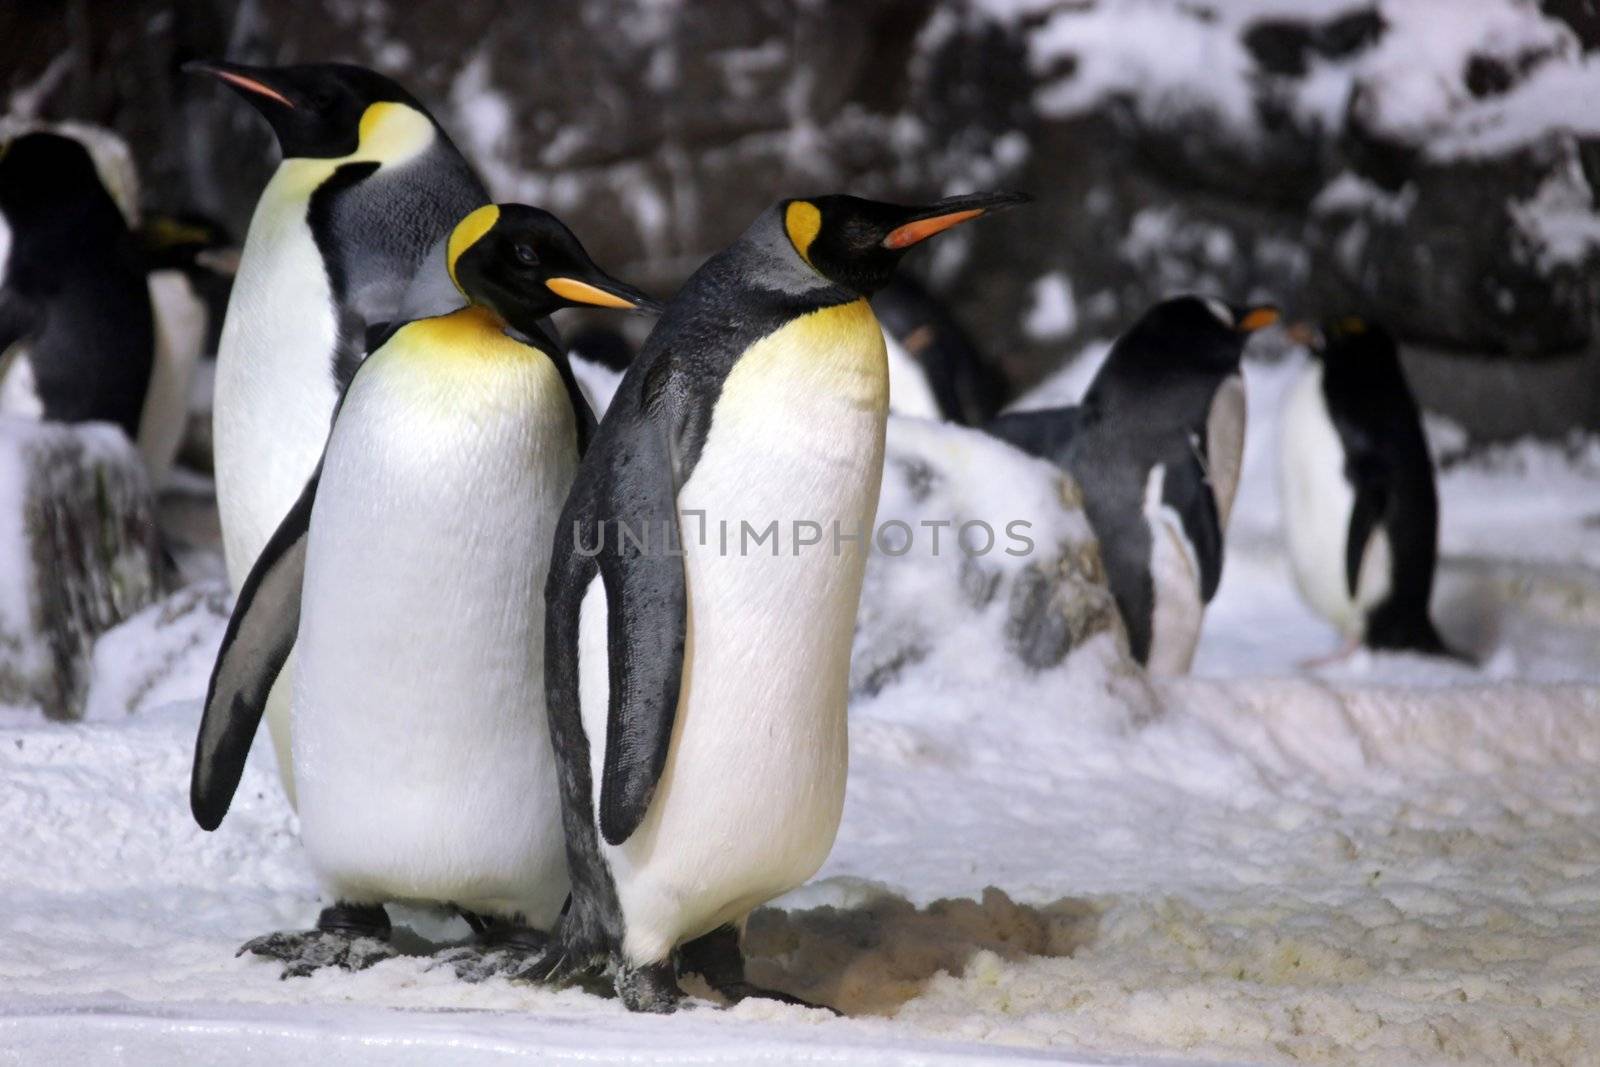 Emperor Penguins Hanging Out Together. Note Shot in High ISO Due to Low Light